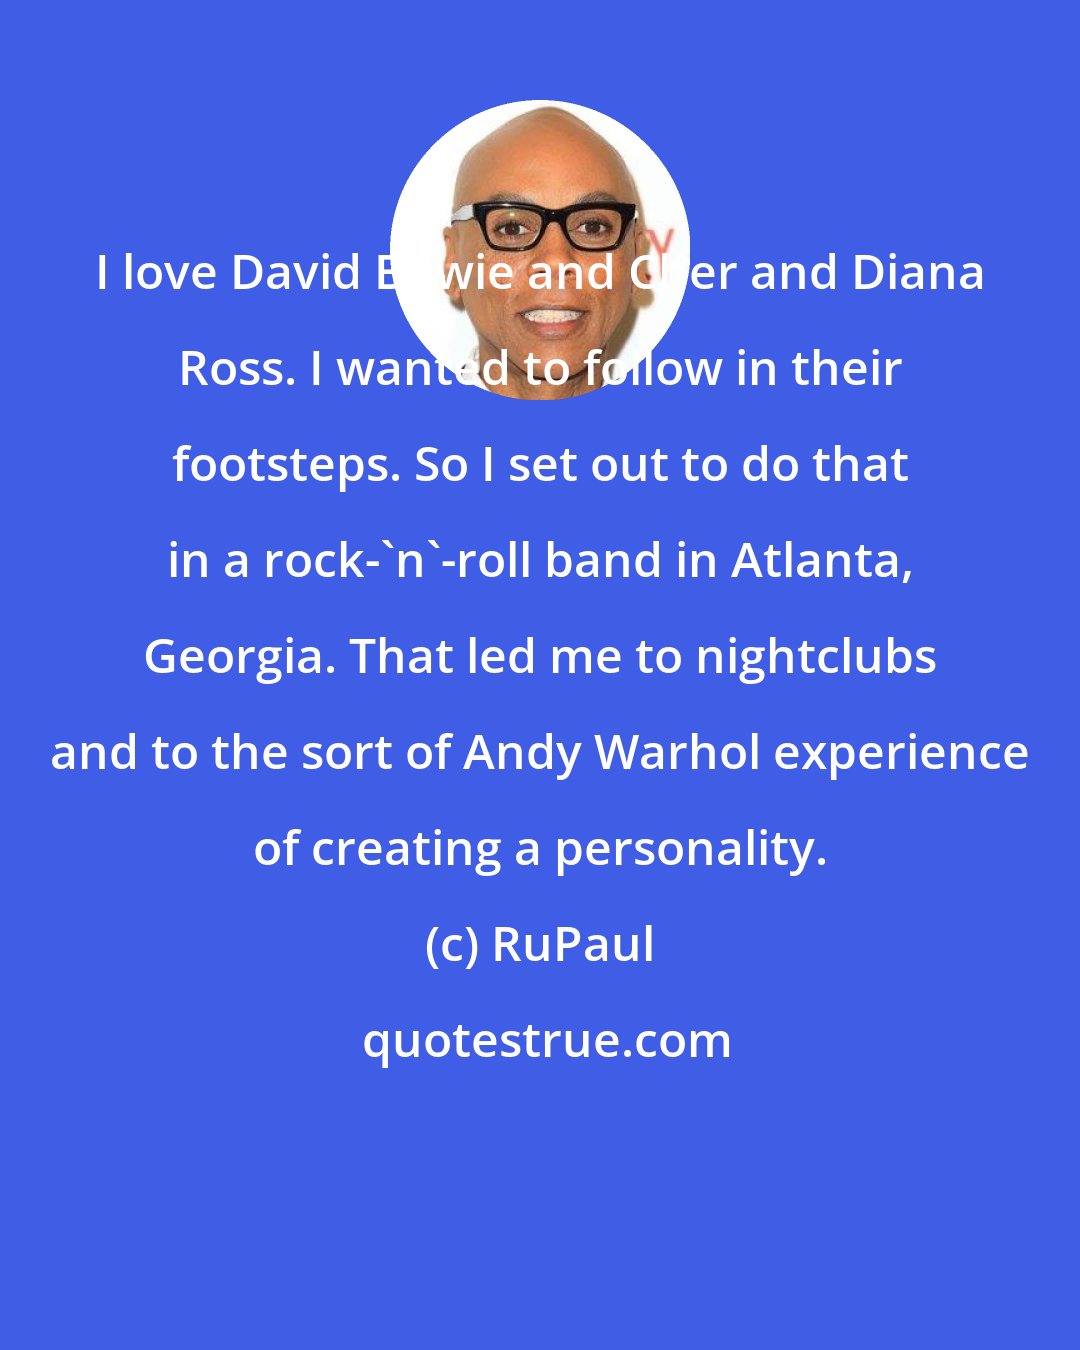 RuPaul: I love David Bowie and Cher and Diana Ross. I wanted to follow in their footsteps. So I set out to do that in a rock-'n'-roll band in Atlanta, Georgia. That led me to nightclubs and to the sort of Andy Warhol experience of creating a personality.